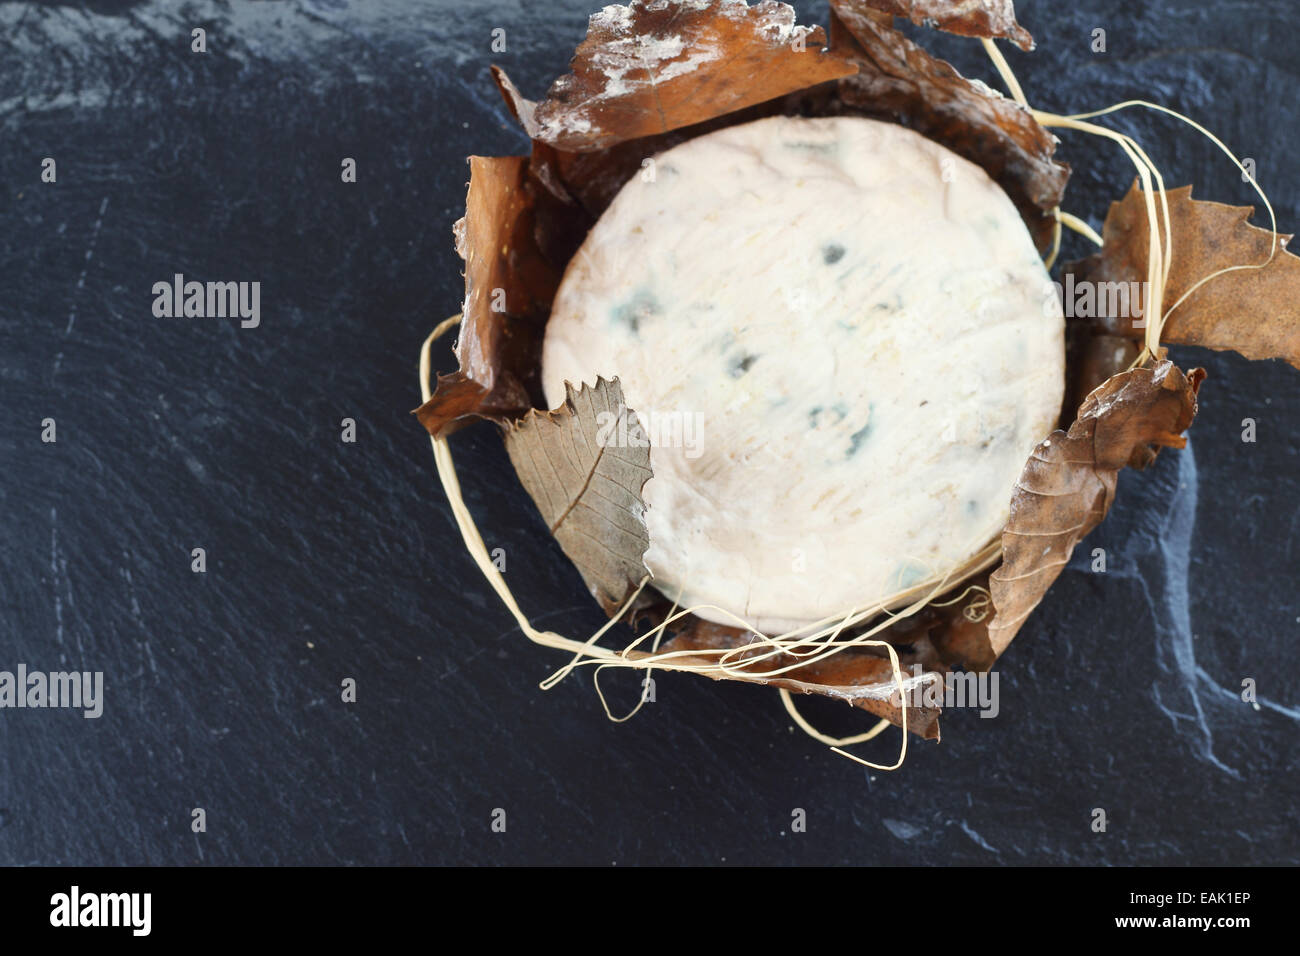 Banon cheese wrapped with leaves on black stone plate Stock Photo